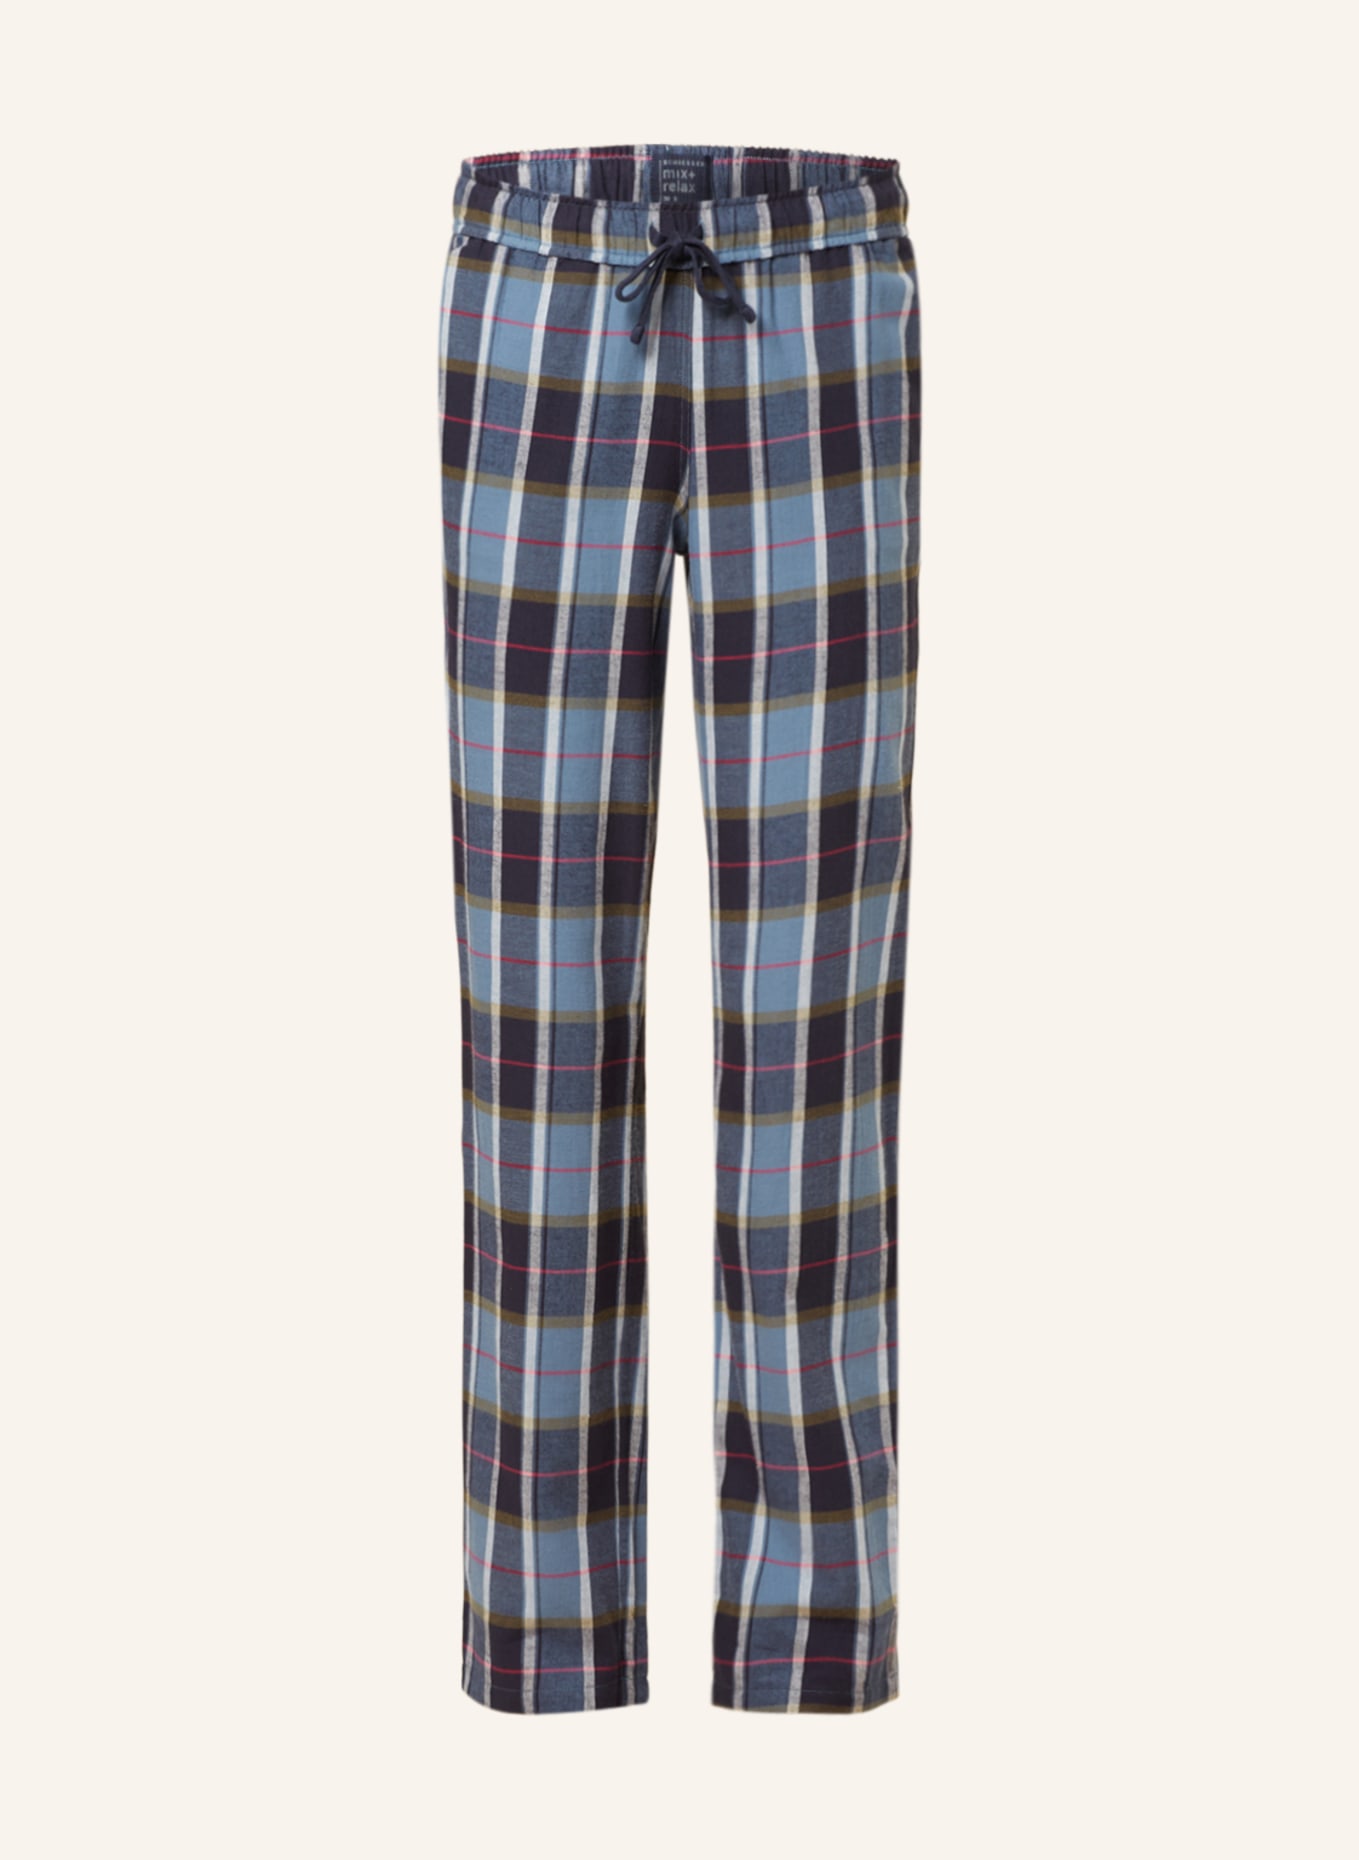 SCHIESSER Pajama pants MIX+RELAX in flannel, Color: DARK BLUE/ LIGHT BLUE/ WHITE (Image 1)